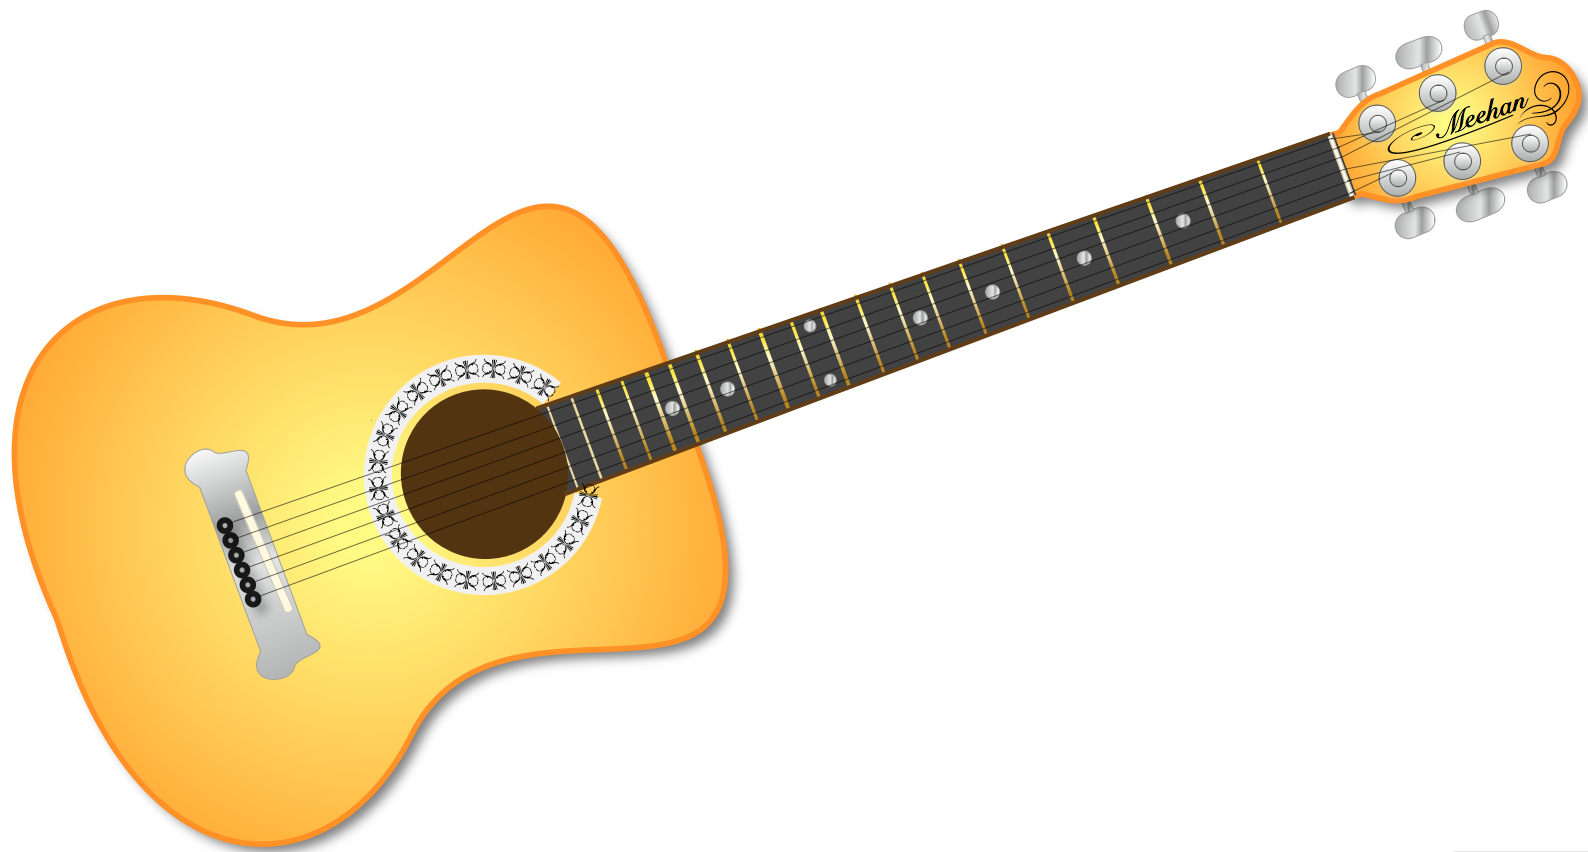 Free guitar clipart the cliparts 2